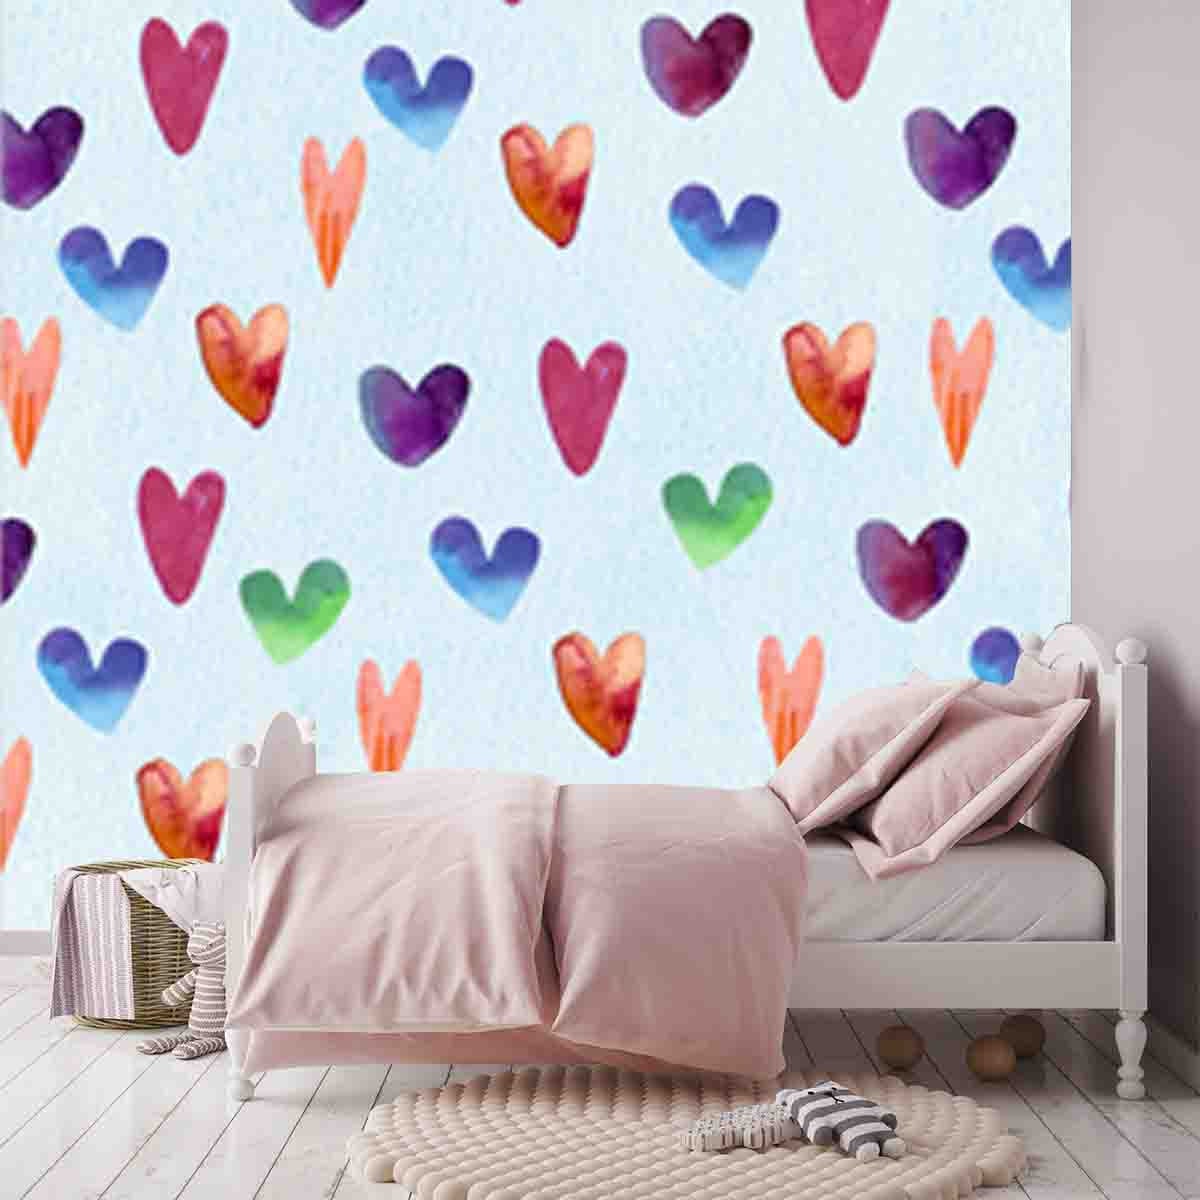 Watercolor Kids Hearts Seamless Pattern. Doodle Hand Painted Background Wallpaper Girl Bedroom Mural